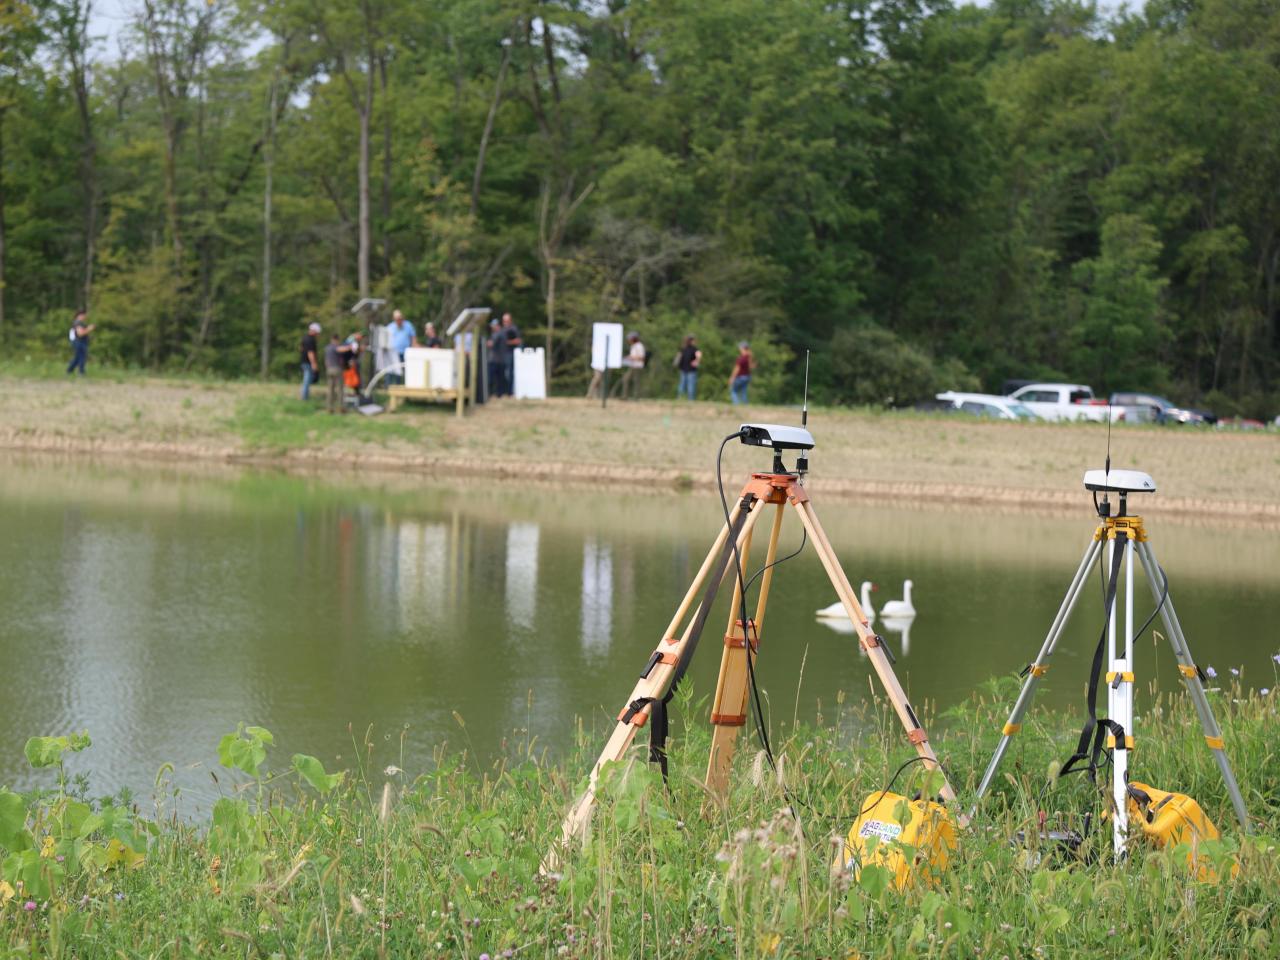 monitoring equipment at the retention pond